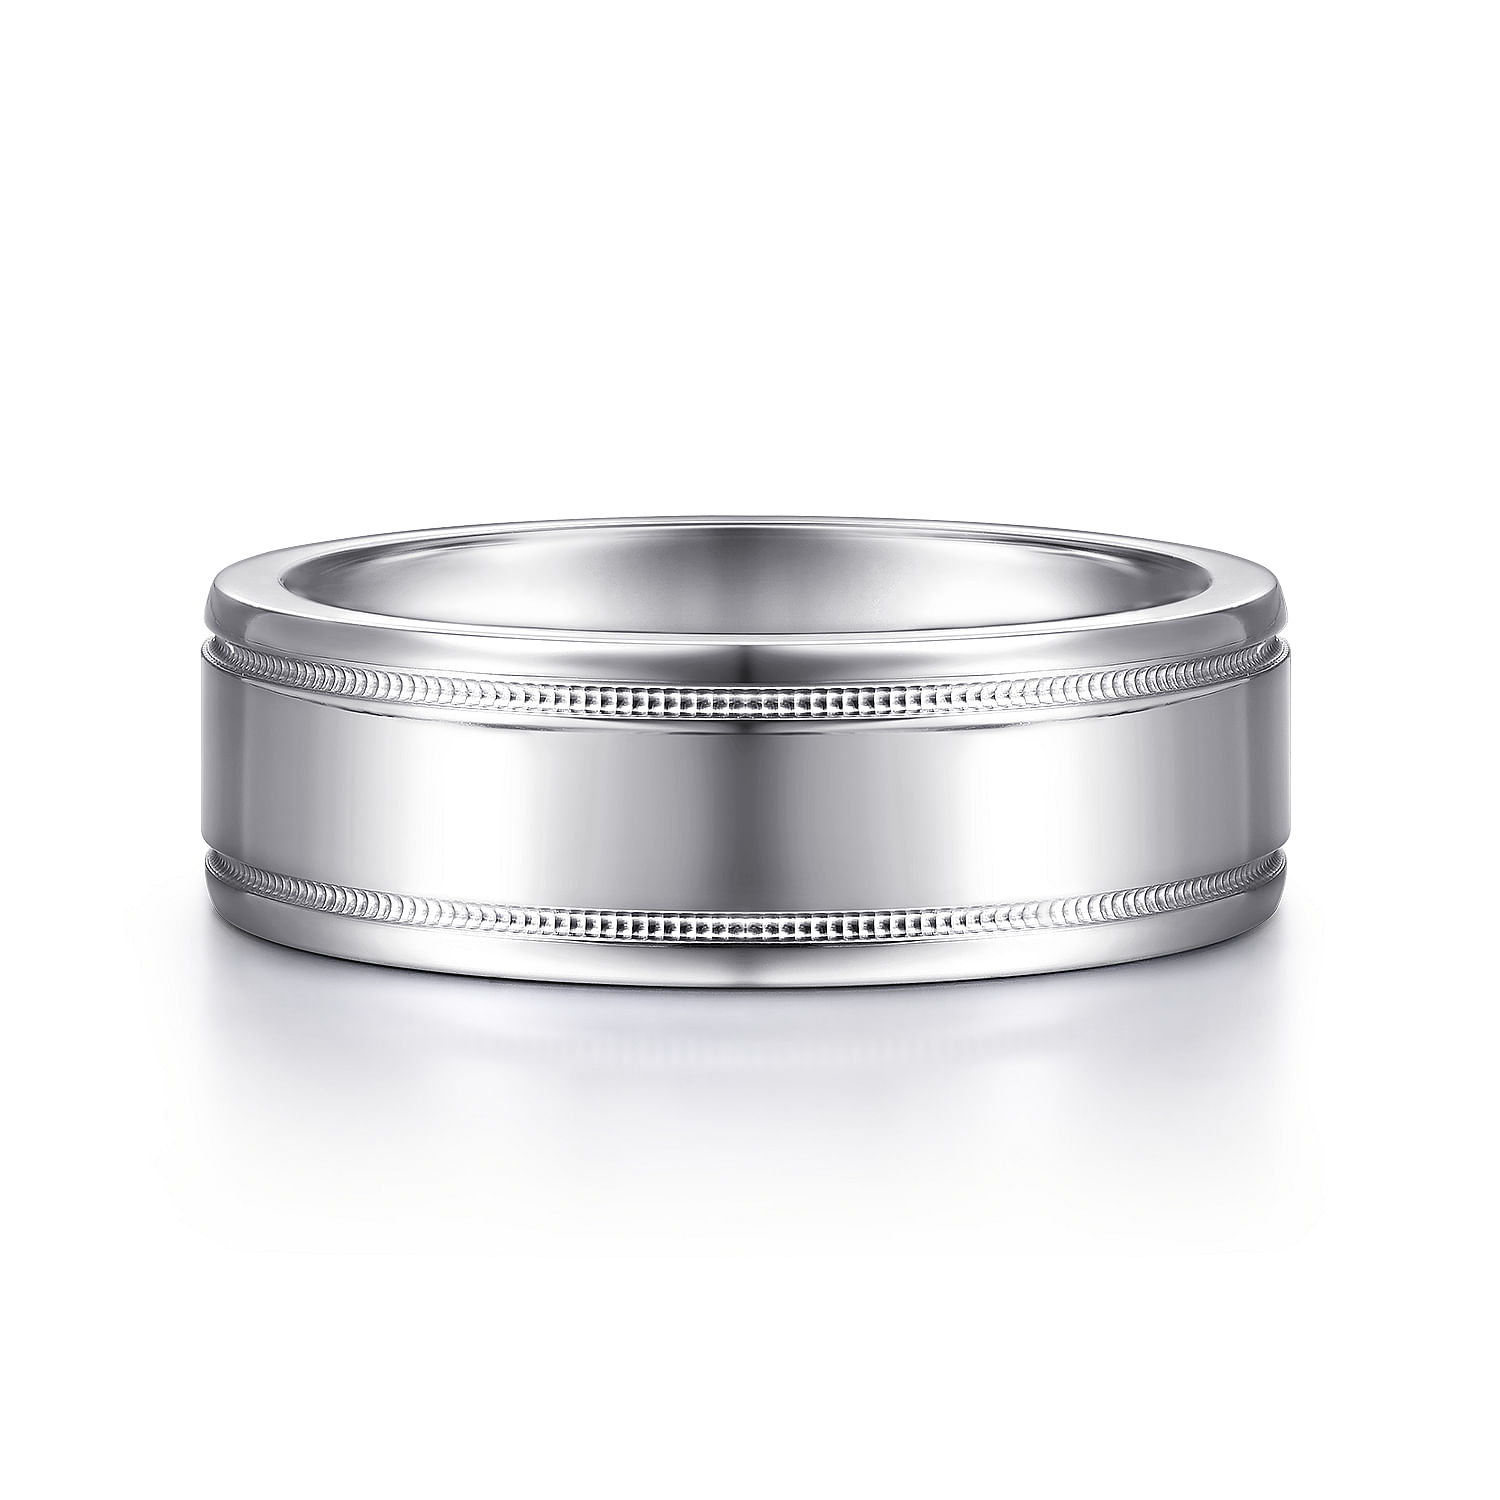 14K White Gold 7mm - High Polished Men's Wedding Band with Millgrain